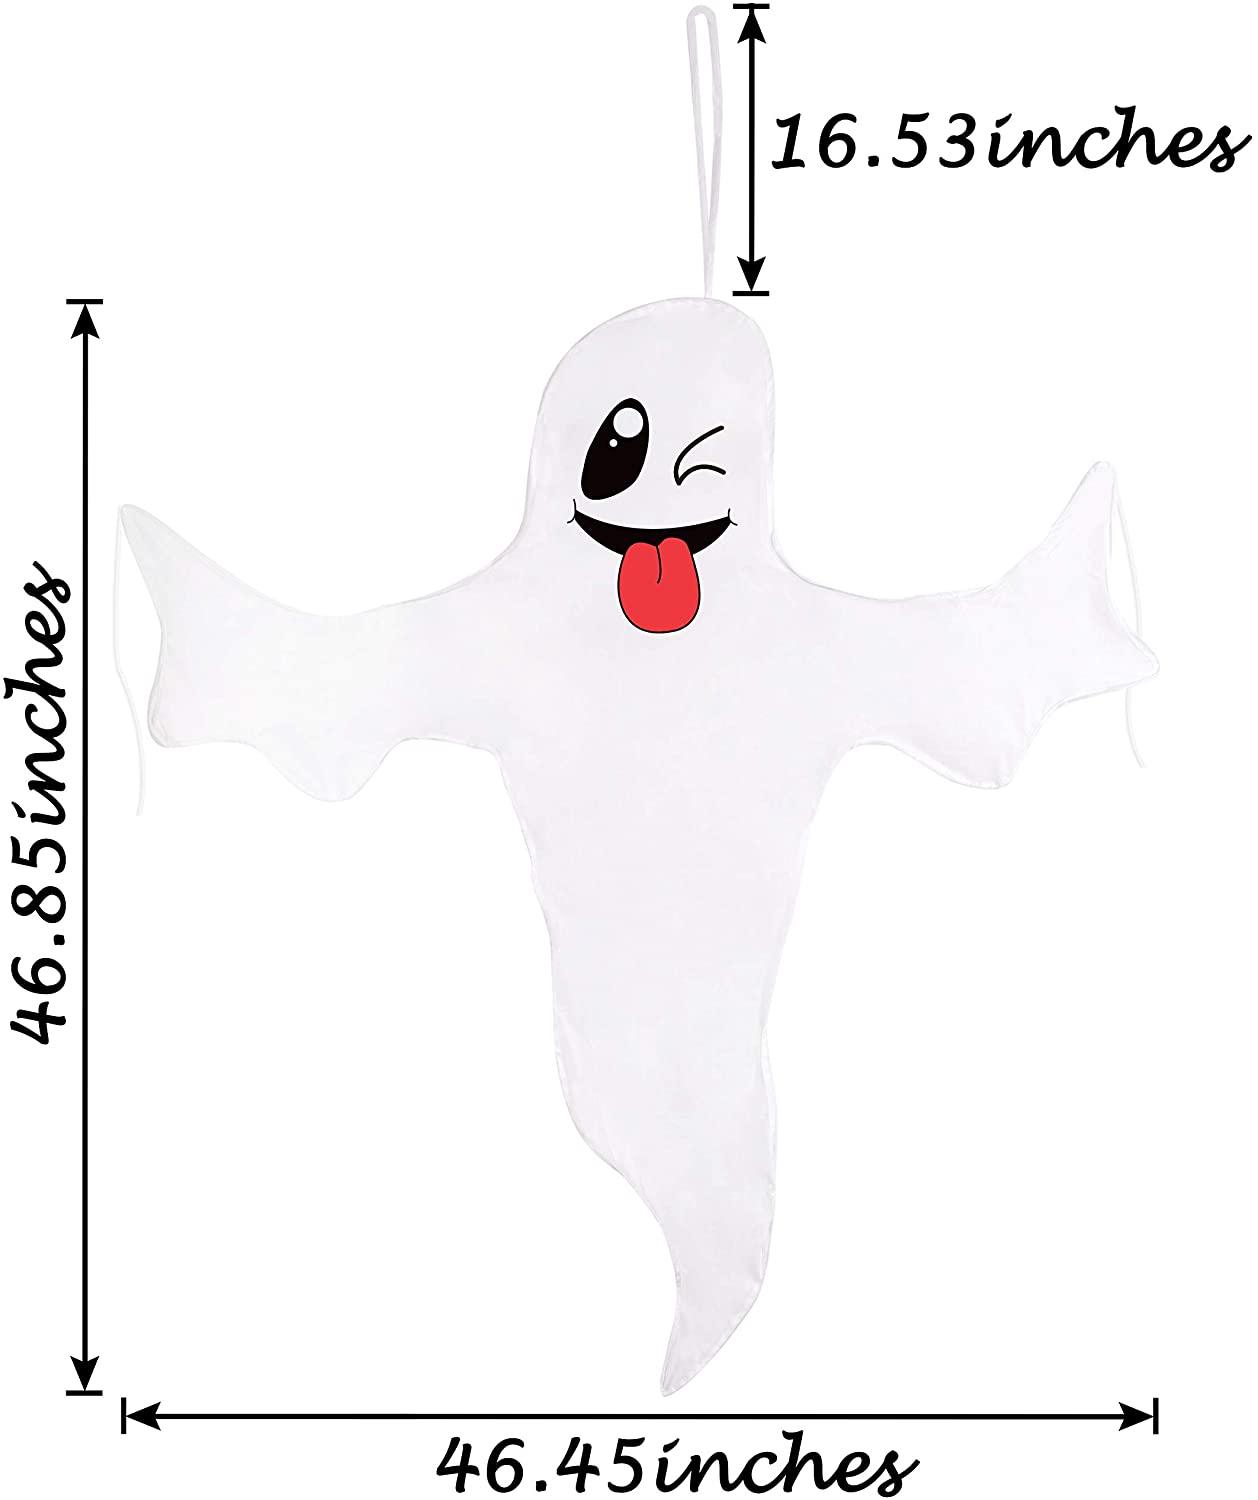 Halloween Ghost Hanging Decoration Outdoor Decor - Hallowmas Tree Hugger Friendly Spooky Party Supplies - If you say i do